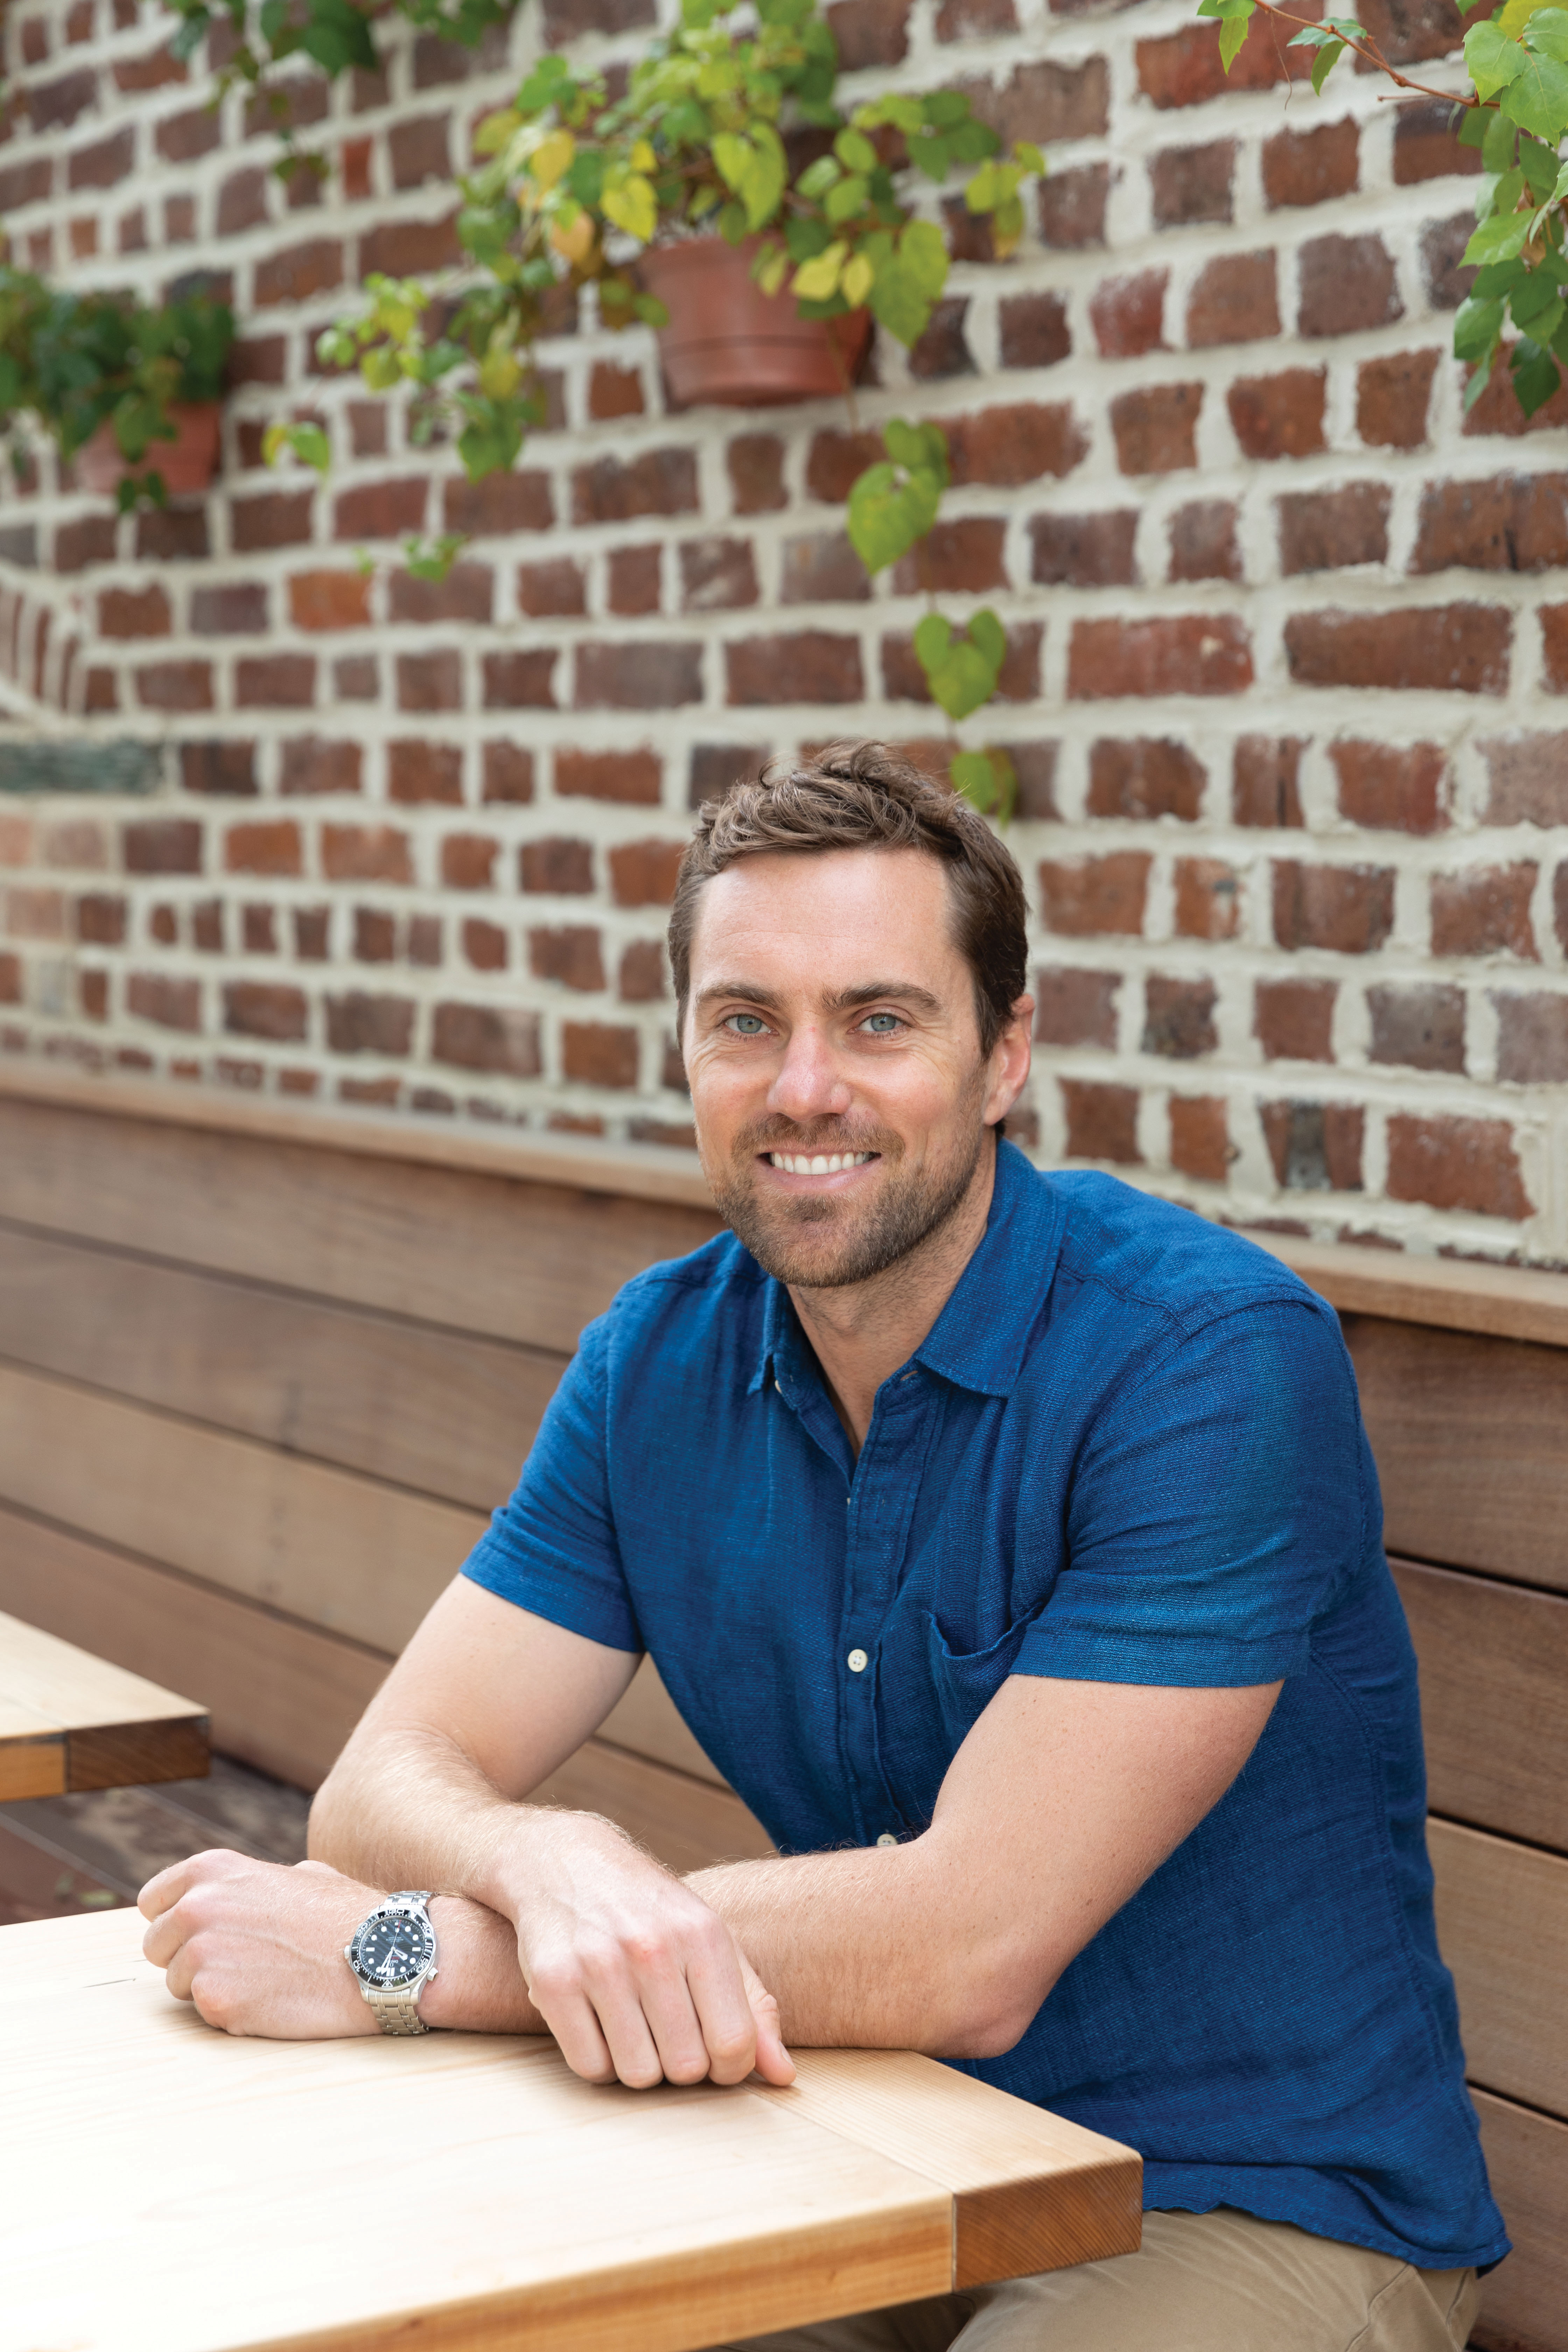 The CEO and owner of 167 Hospitality, Jesse Sandole debuted 167 Raw in Charleston as a fish market and raw bar, after years of running his father’s wholesale seafood company in Nantucket.